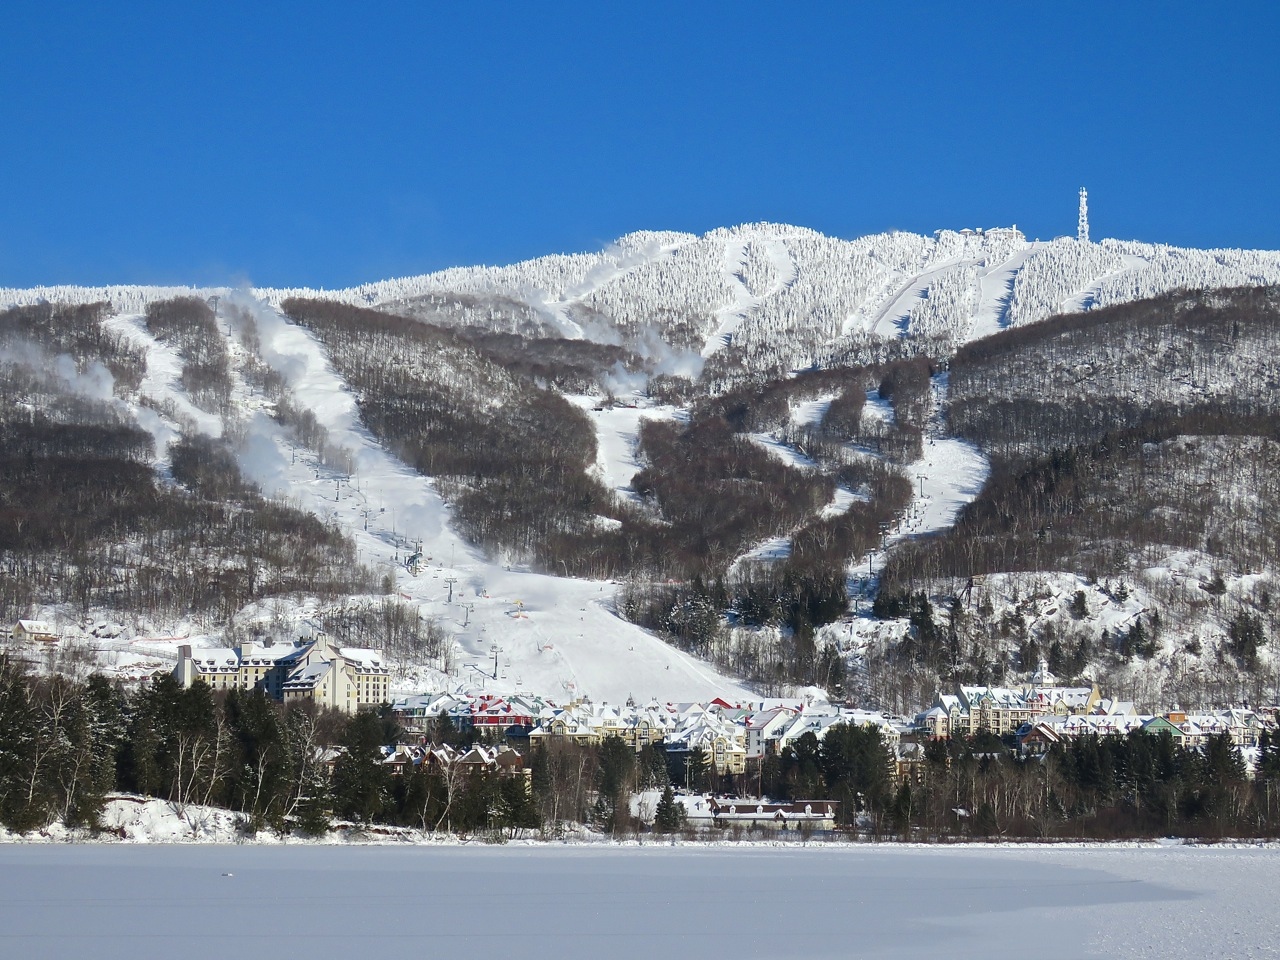 www.Tremblant360.com photo. All Rights Reserved.